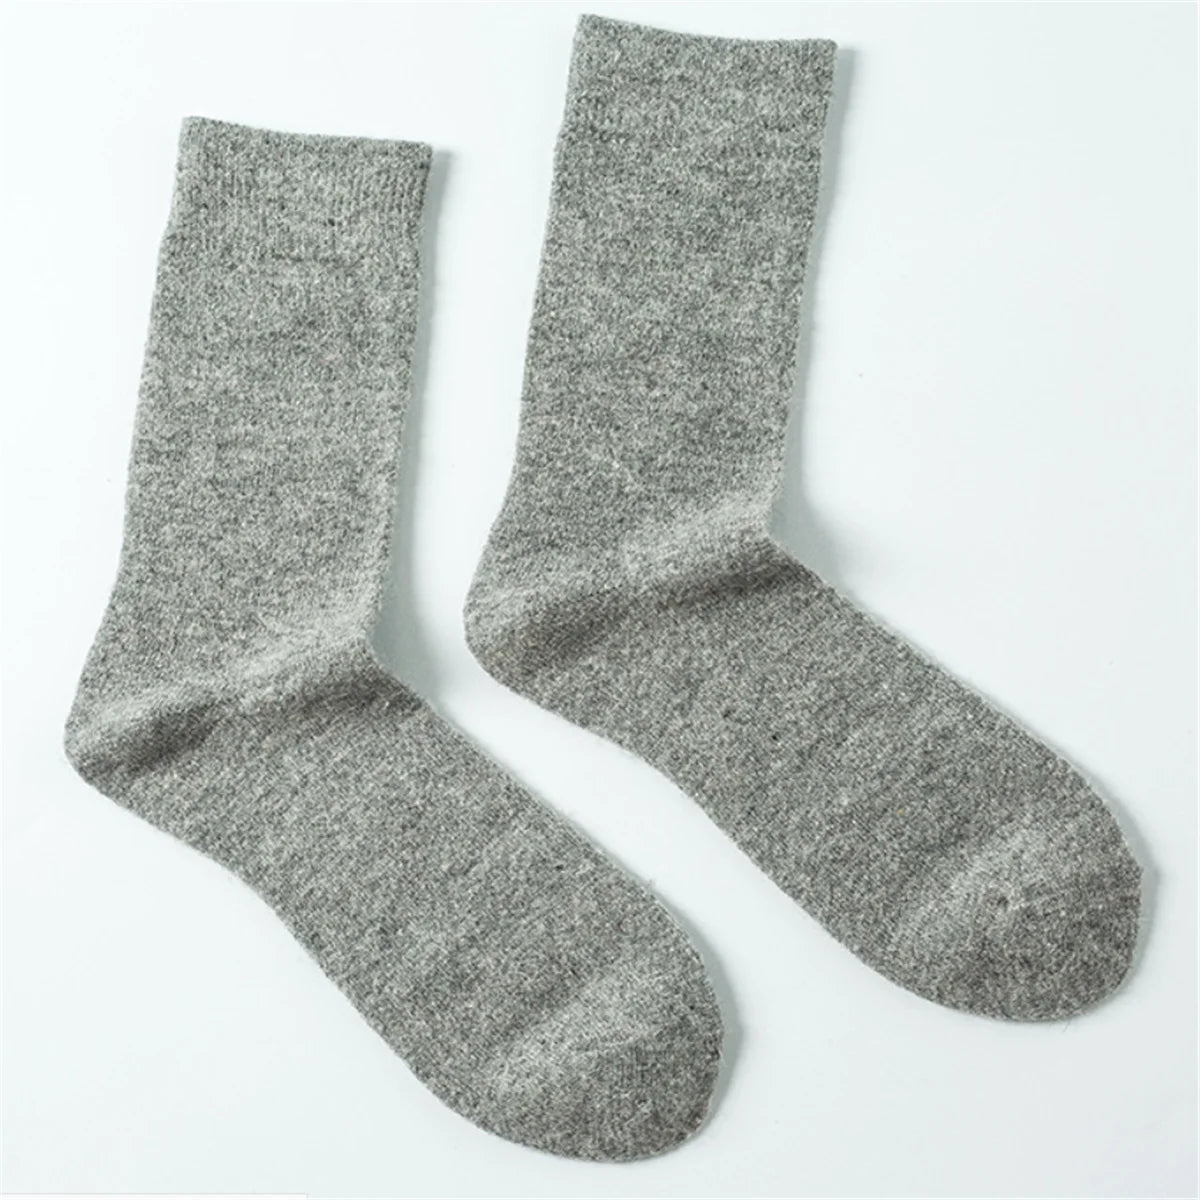 Sage Mint Wool Cashmere Mens Socks | Hypoallergenic - Allergy Friendly - Naturally Free